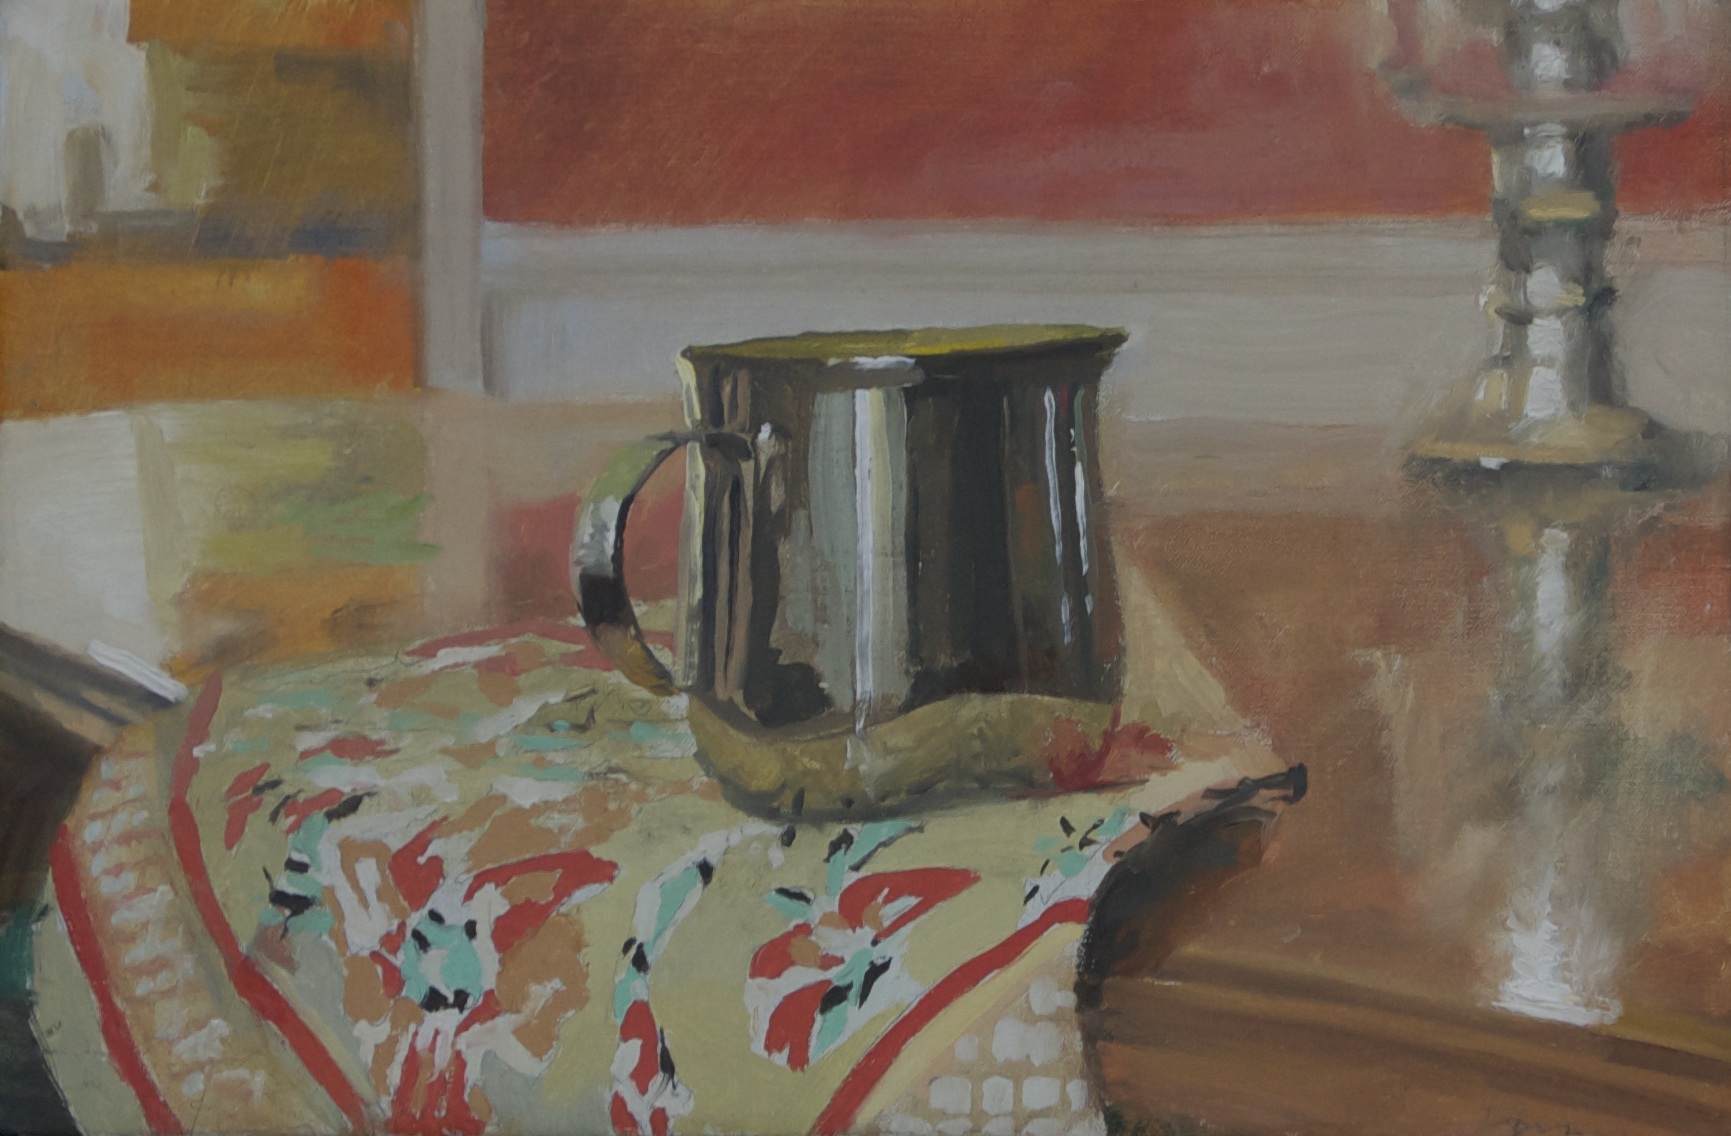 Cream Pitcher in Dining Room